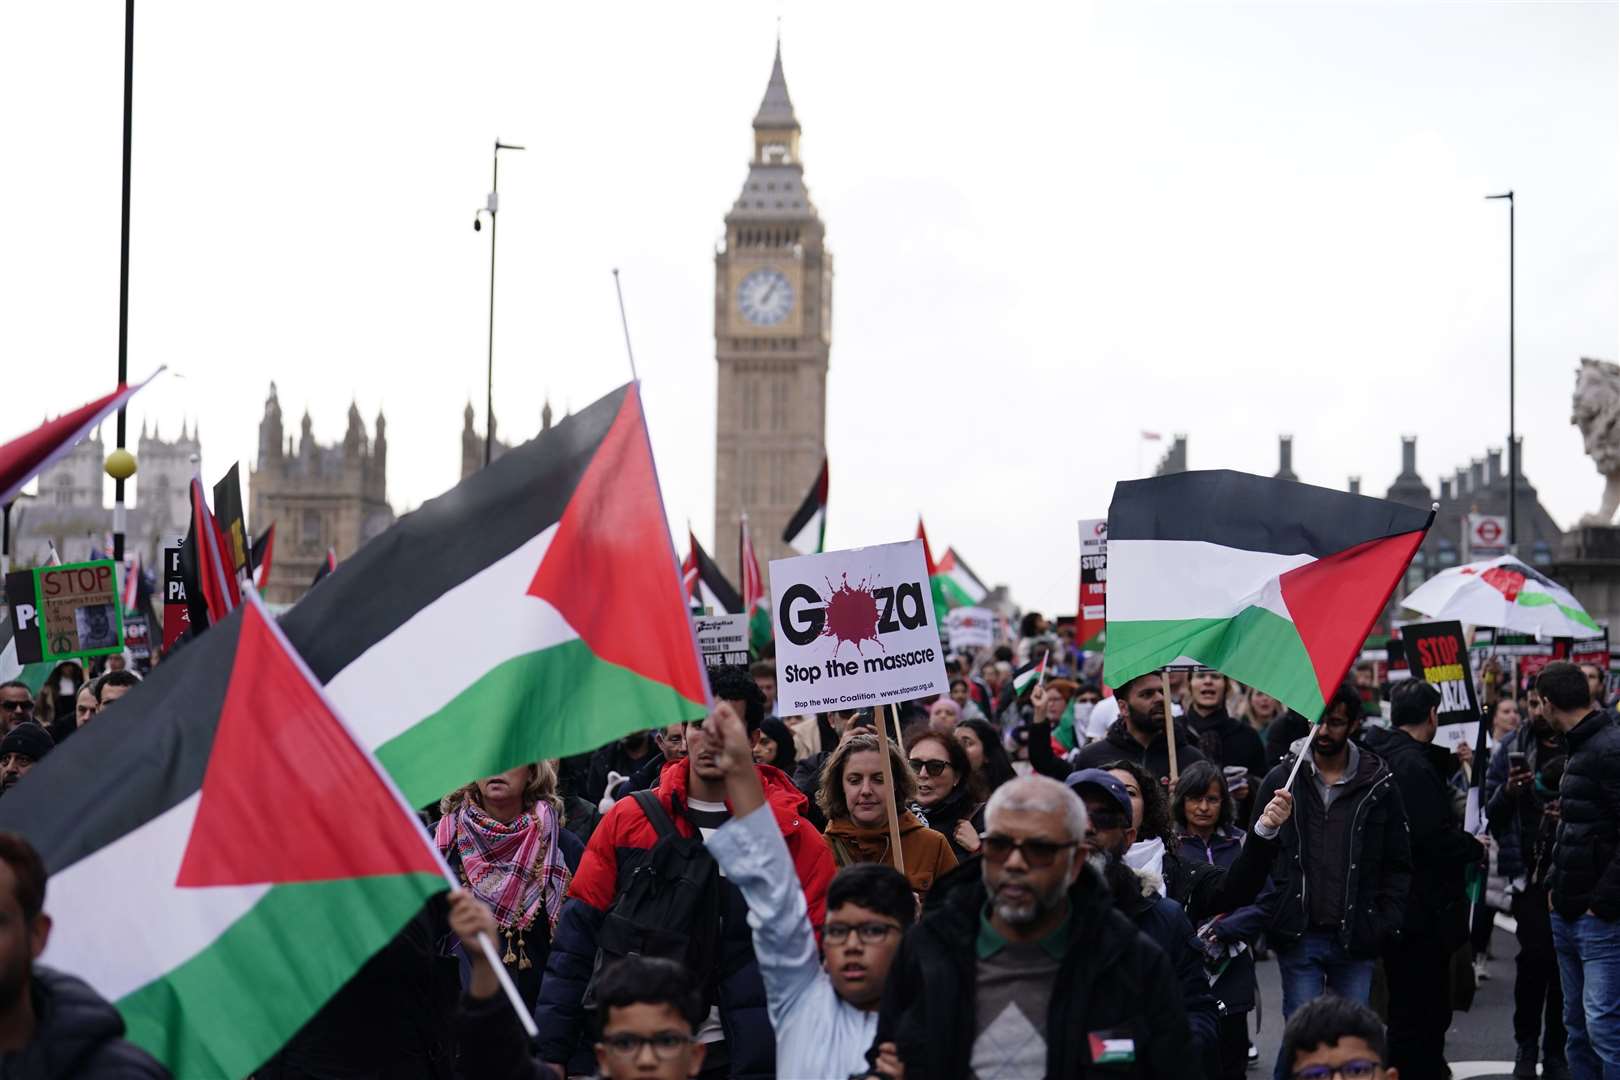 Protesters during a pro-Palestine march organised by Palestine Solidarity Campaign in central London last month (Jordan Pettitt/PA)